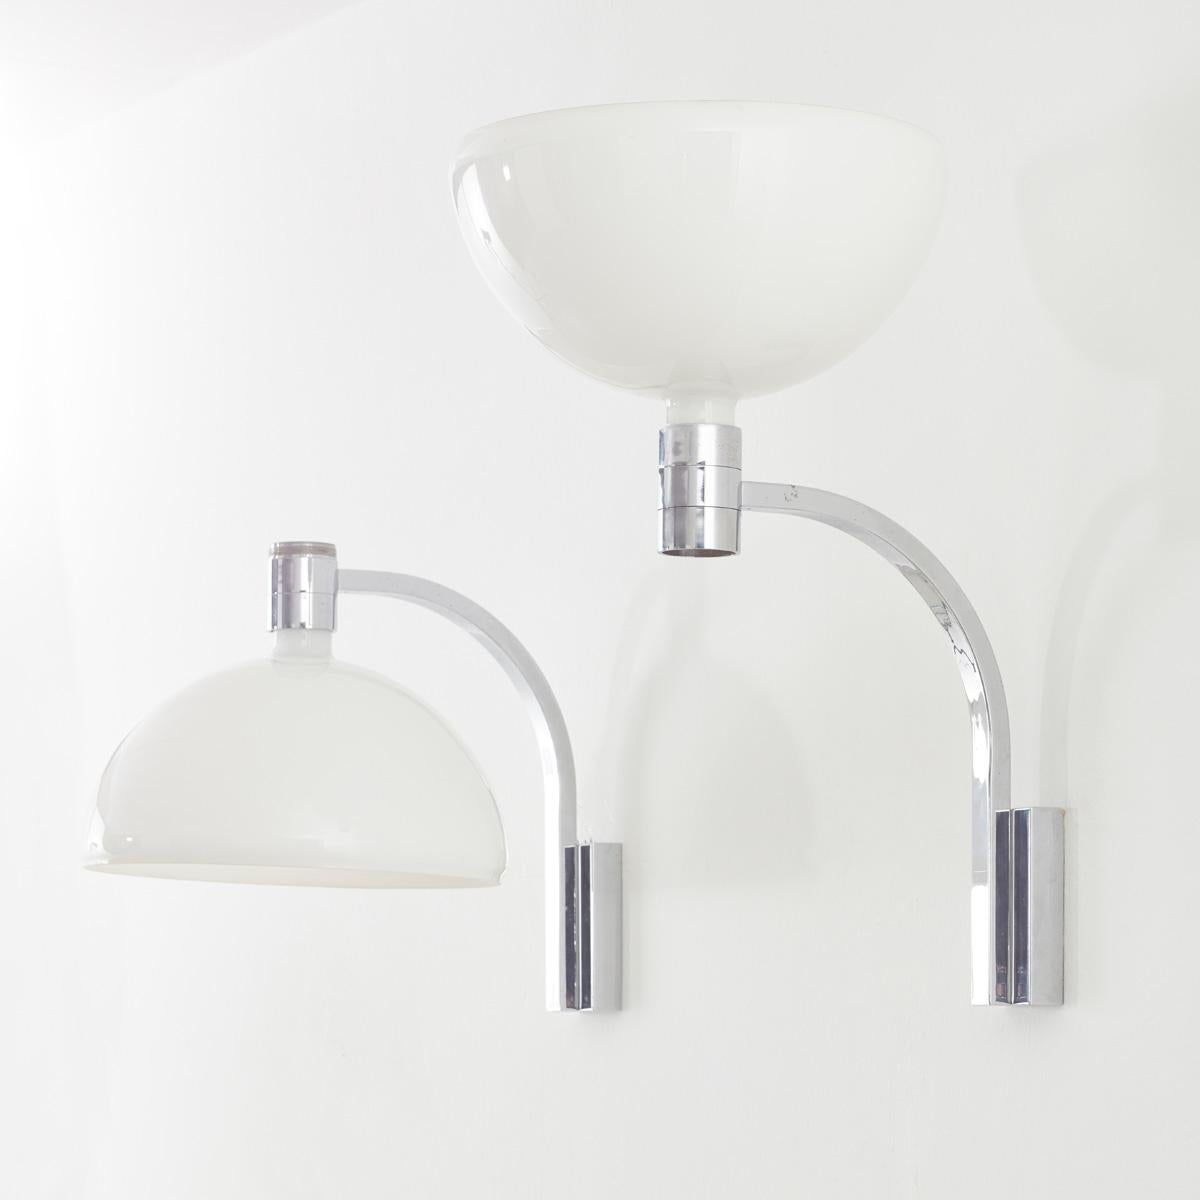 Italian AM/AS wall lights by Albini, Helg and Piva for Sirrah, Italy, c1960 For Sale